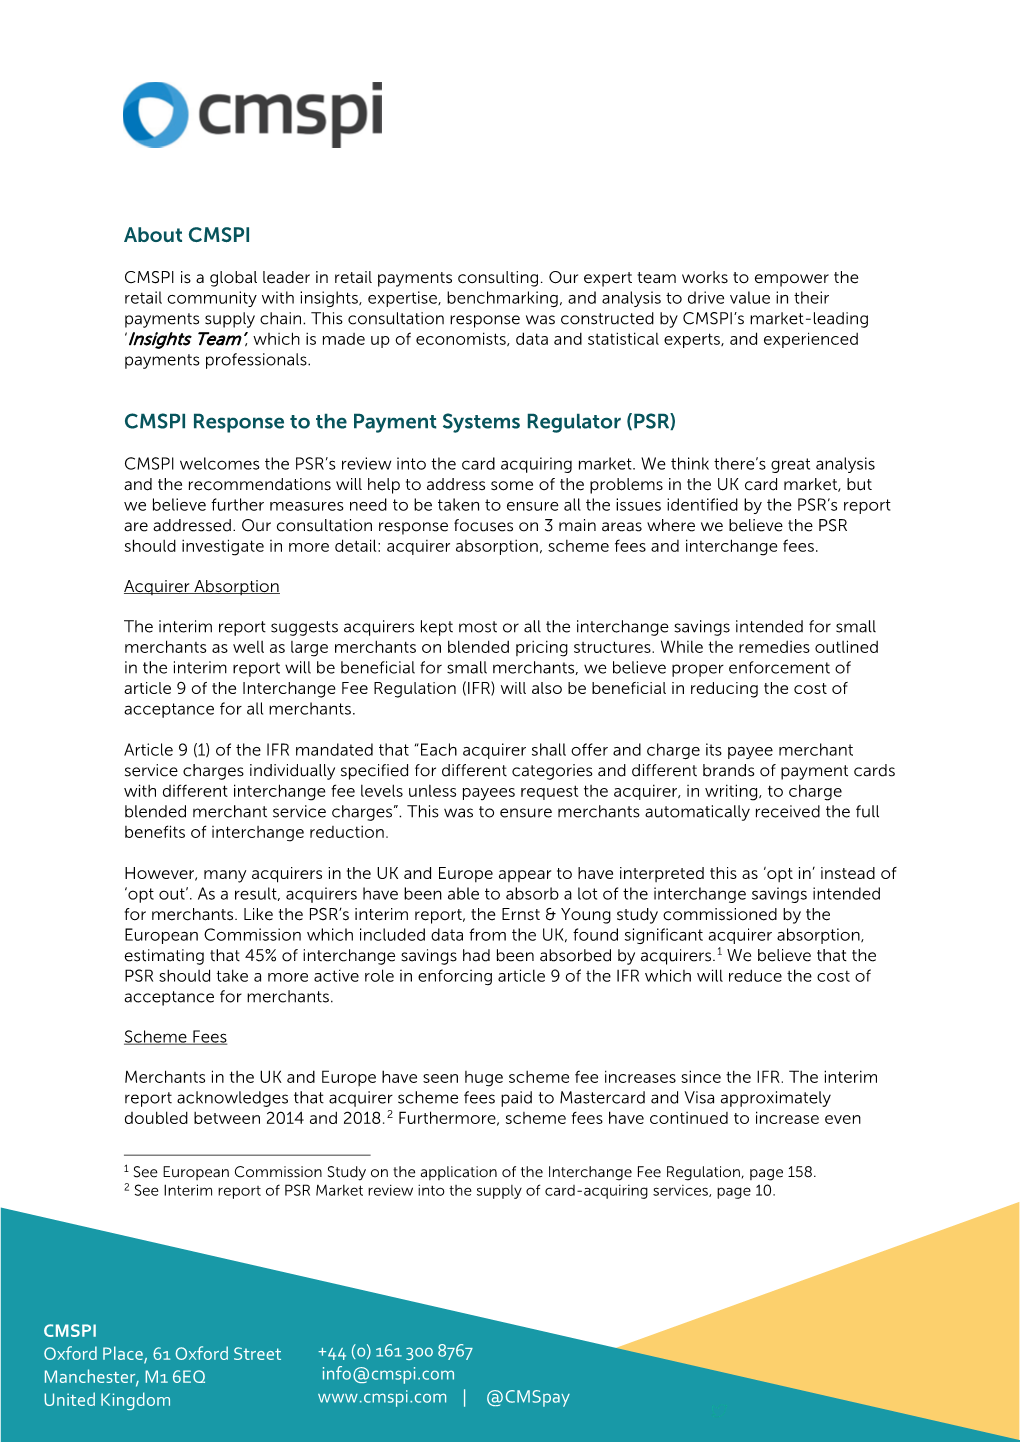 About CMSPI CMSPI Response to the Payment Systems Regulator (PSR)